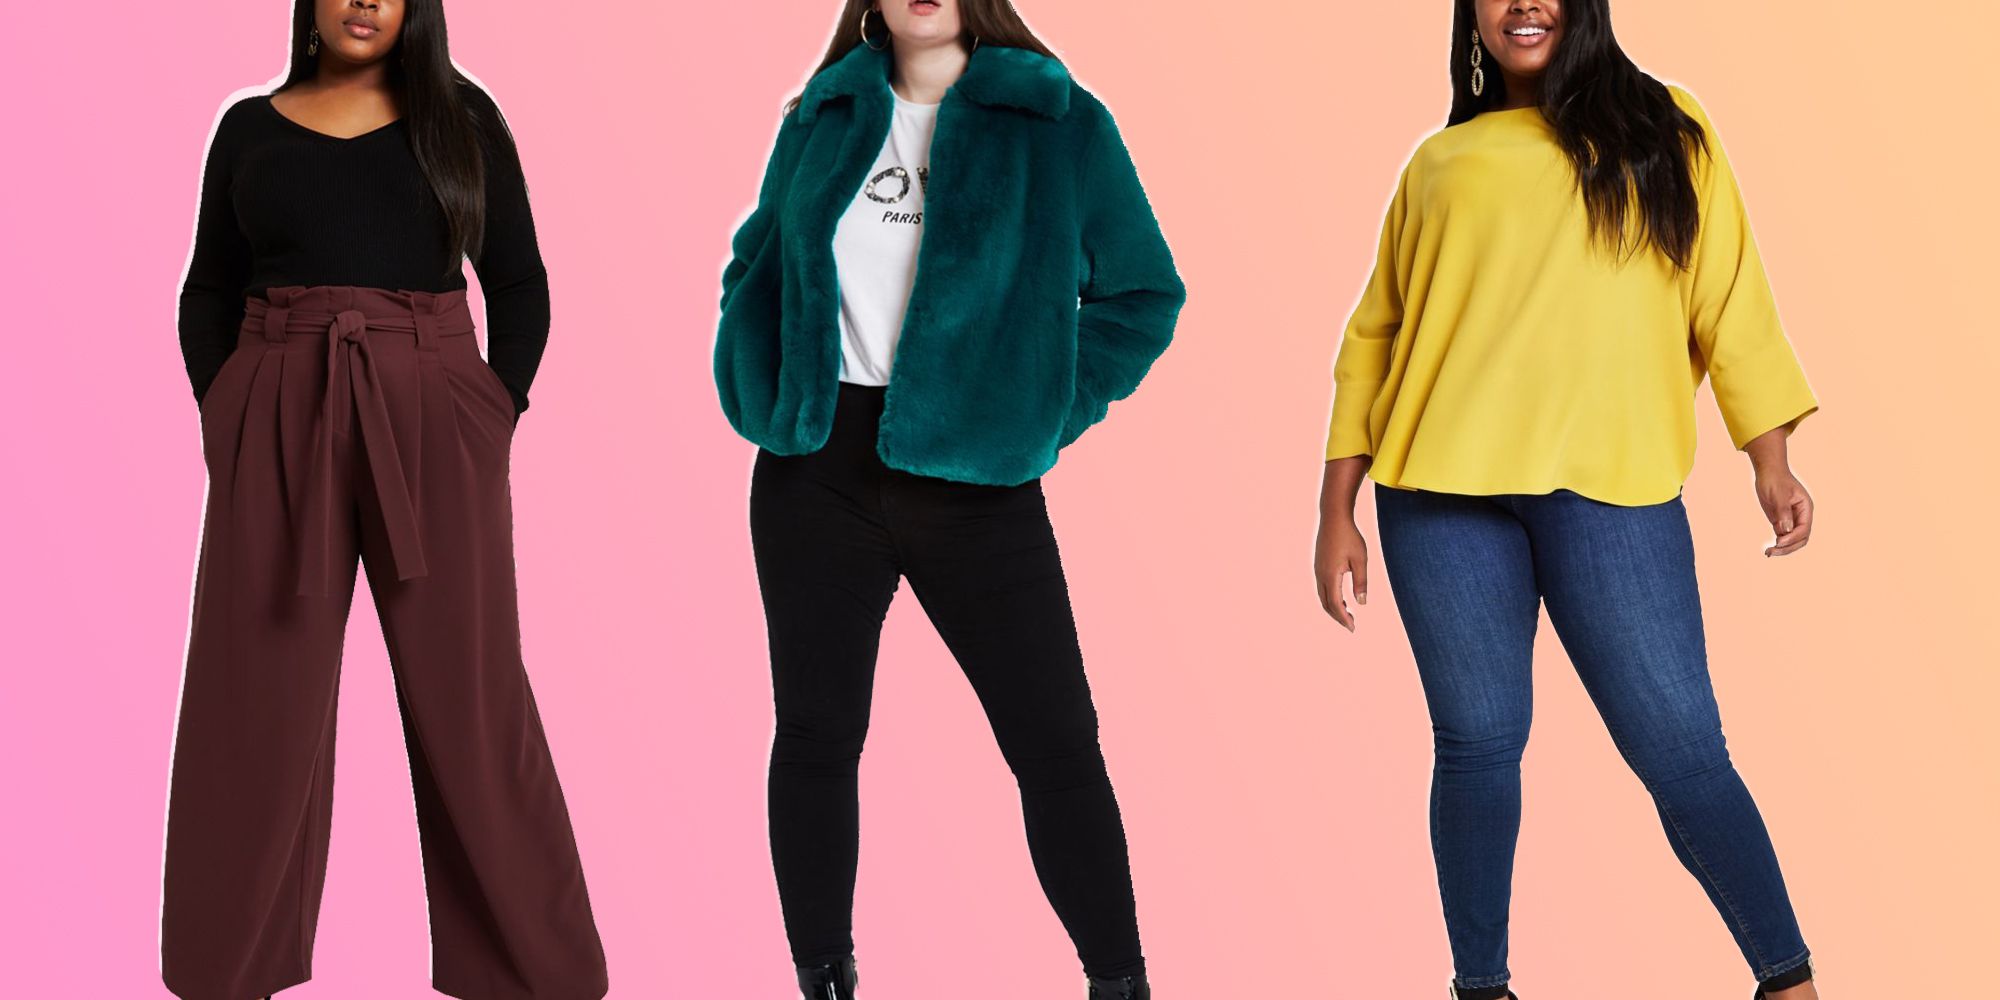 plus-size clothing range from stores